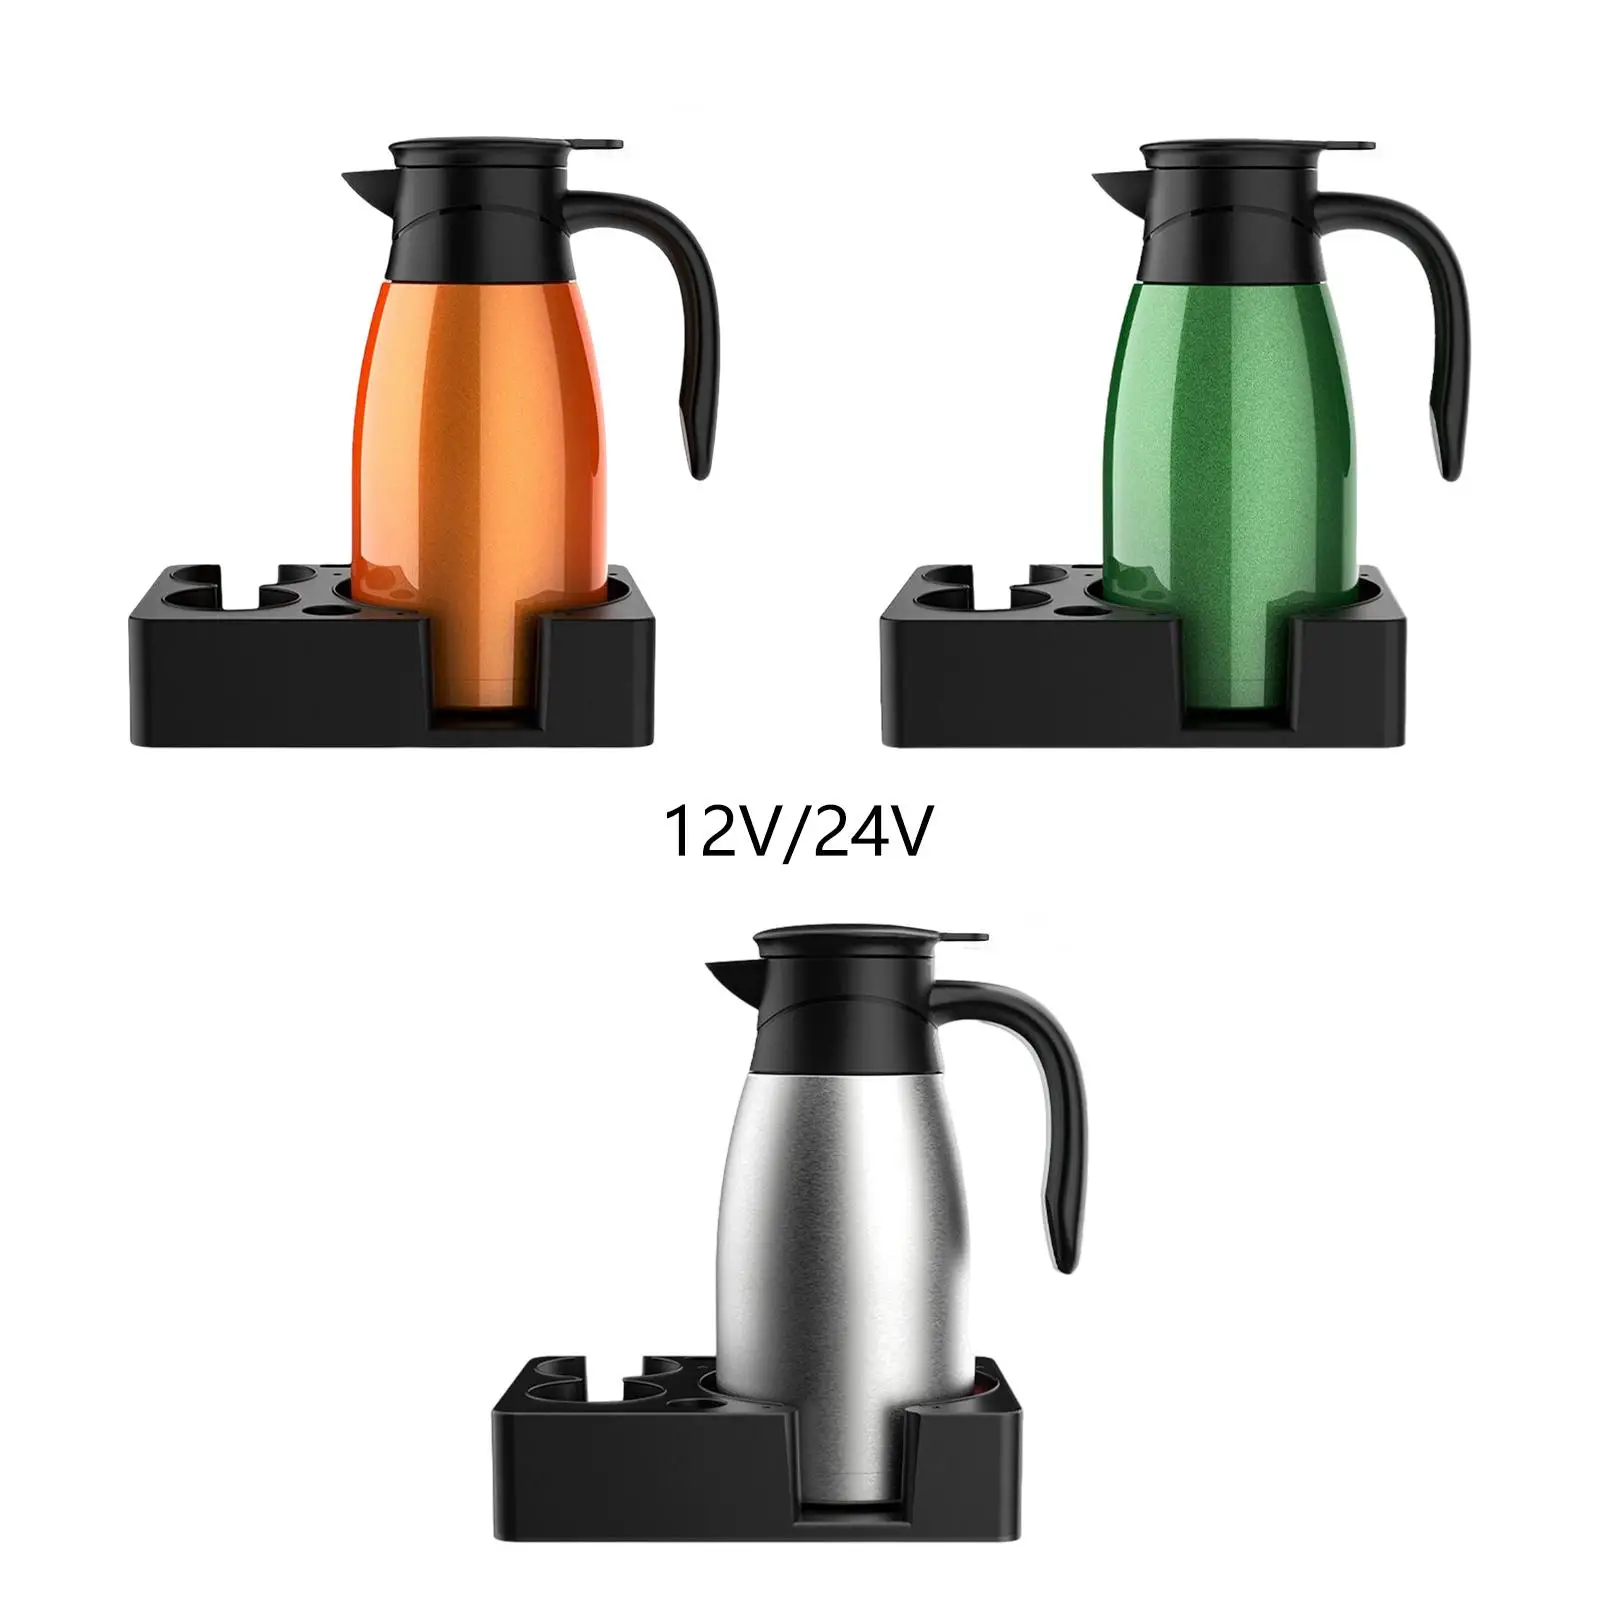 Car Kettle Boiler Temperature Display 1400ml Stainless Steel Heater Hot Water Kettle for Coffee Travel